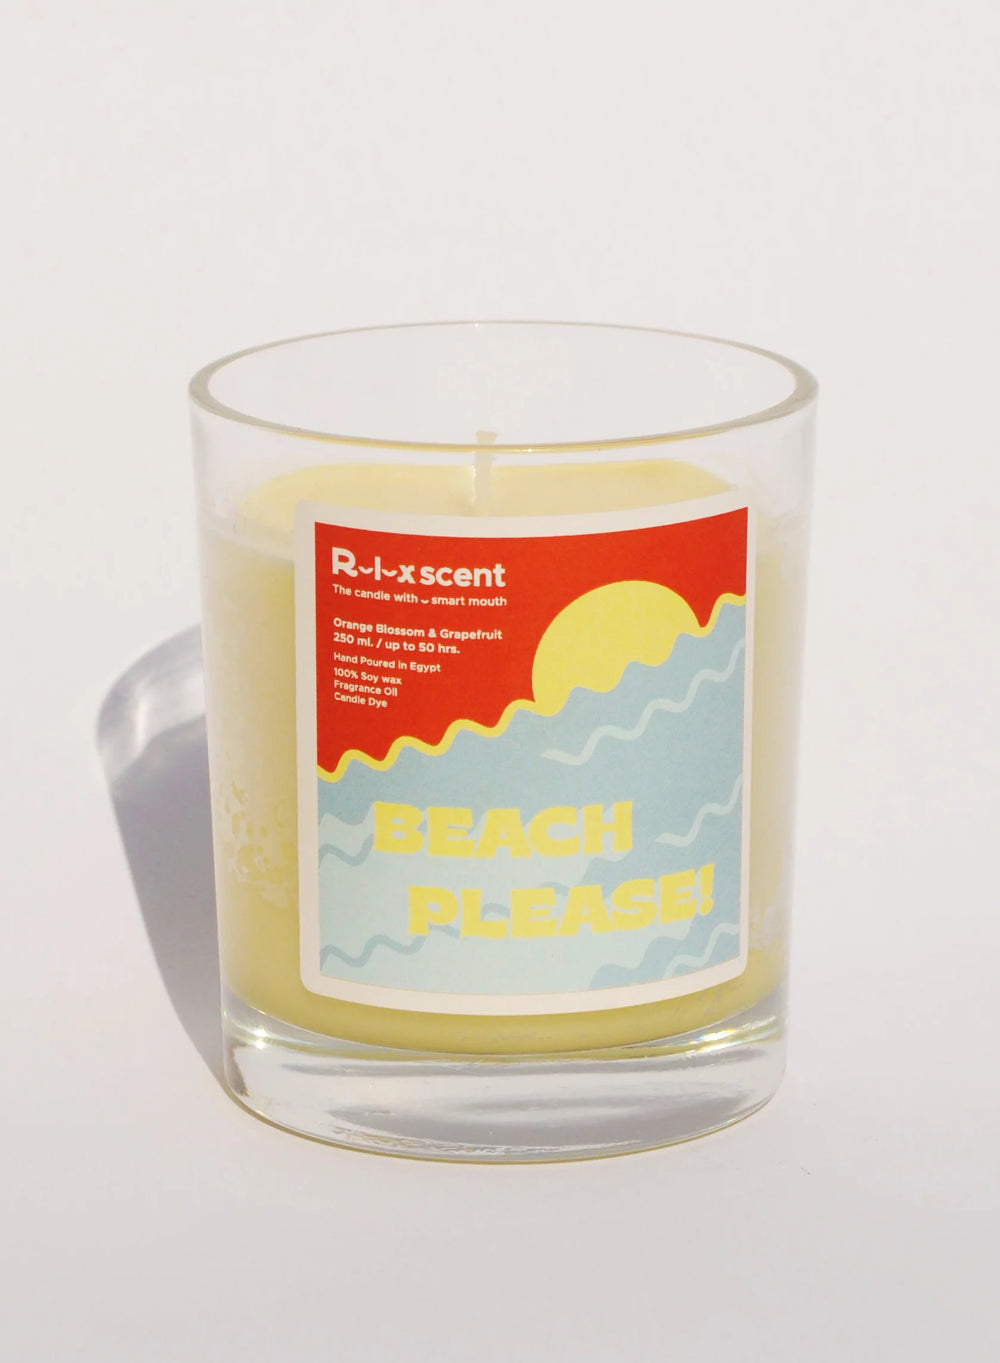 Relaxscent-Beach Please Candles